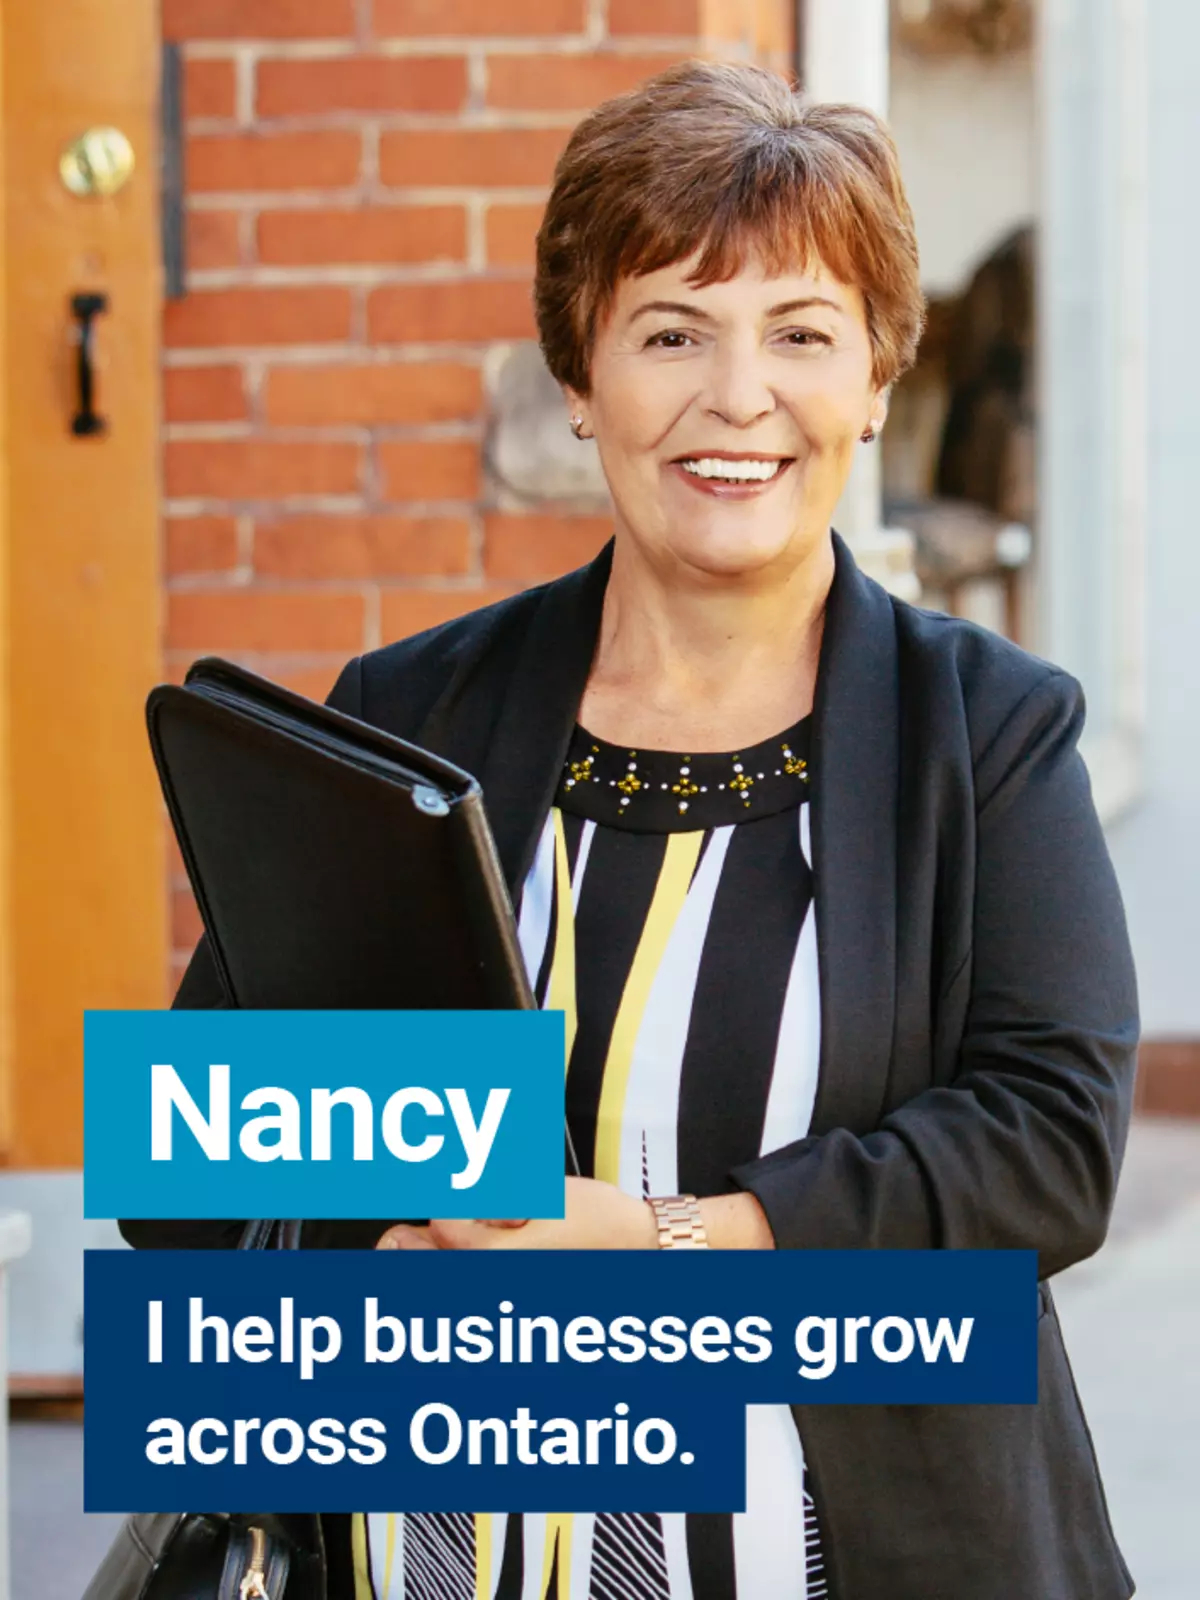 "Nancy - I help businesses grow across Ontario" AMAPCEO member Nancy, a supply chain project lead